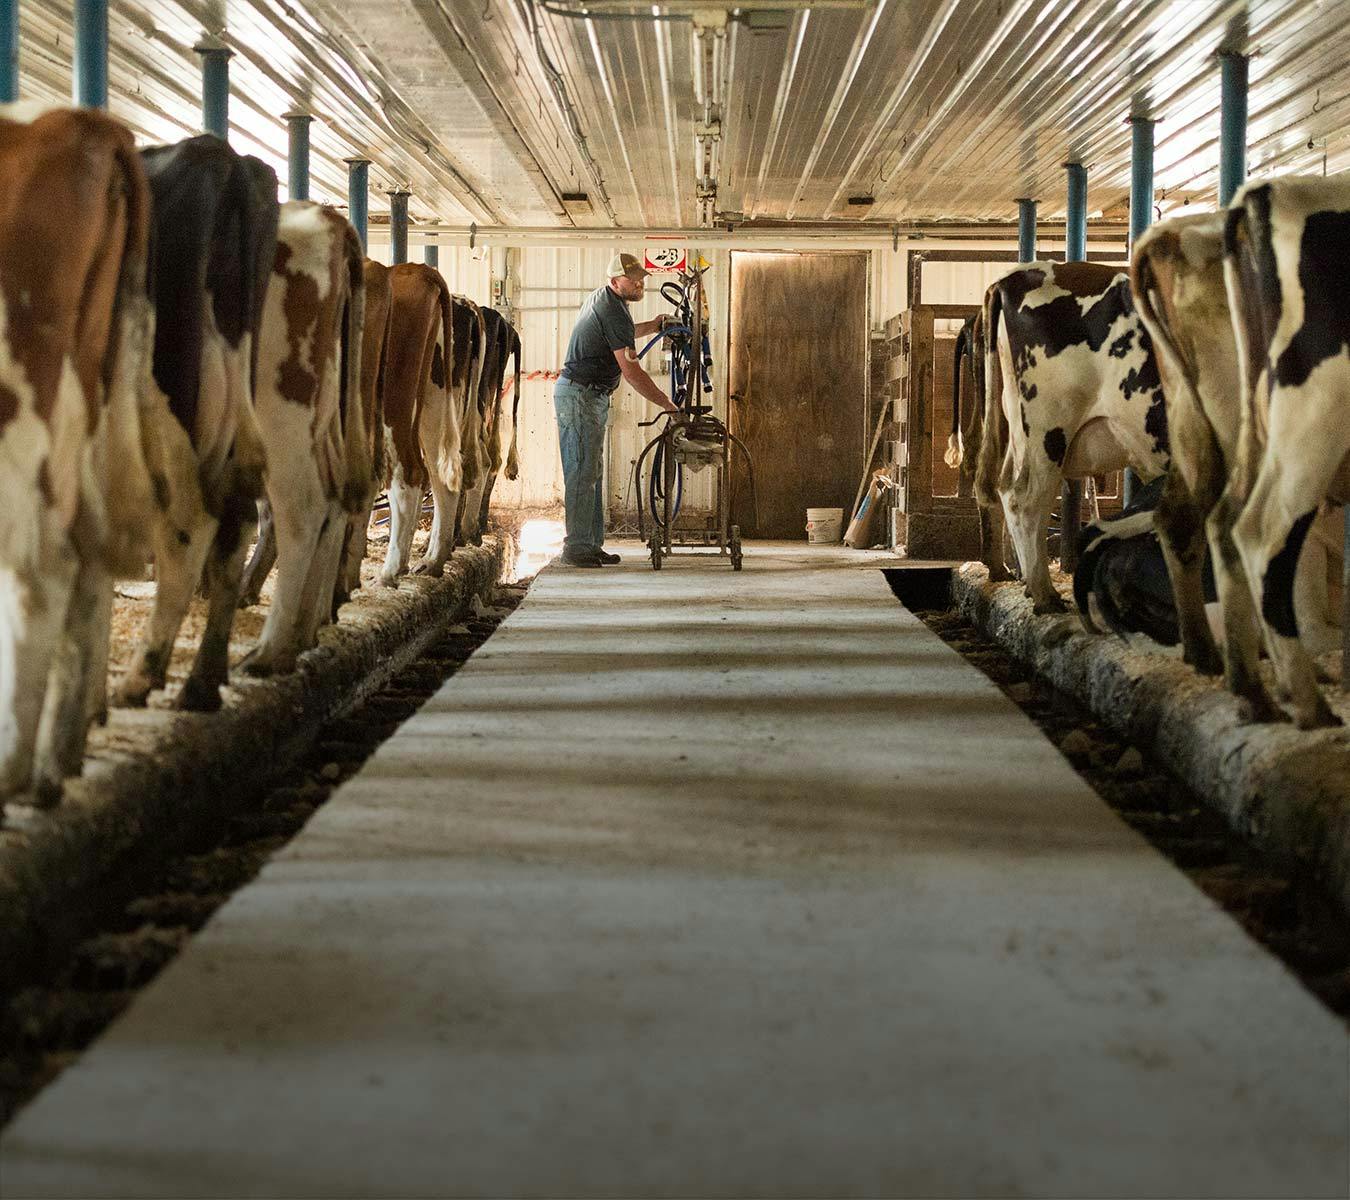 A farmer standing in the barn with his cows during milking time.